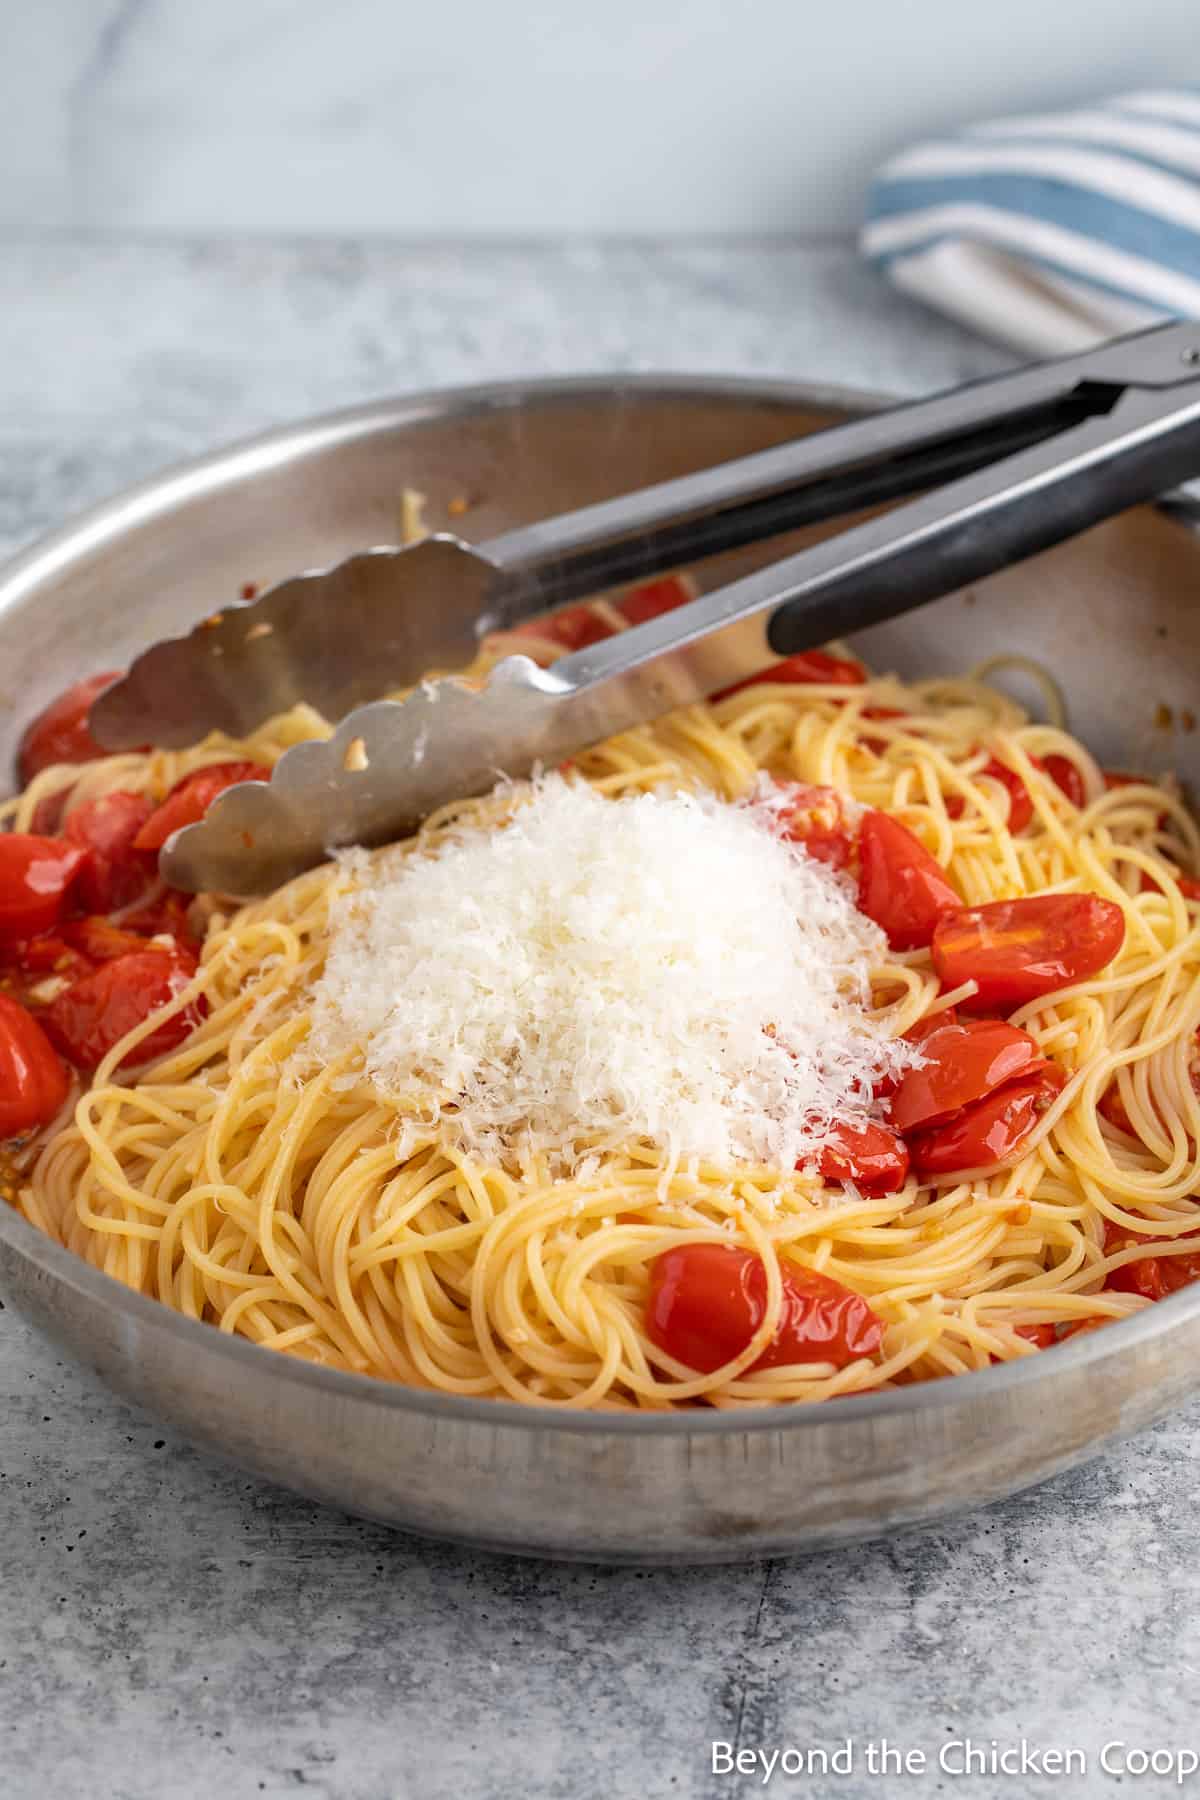 Shredded parmesan cheese added to a pan of pasta.